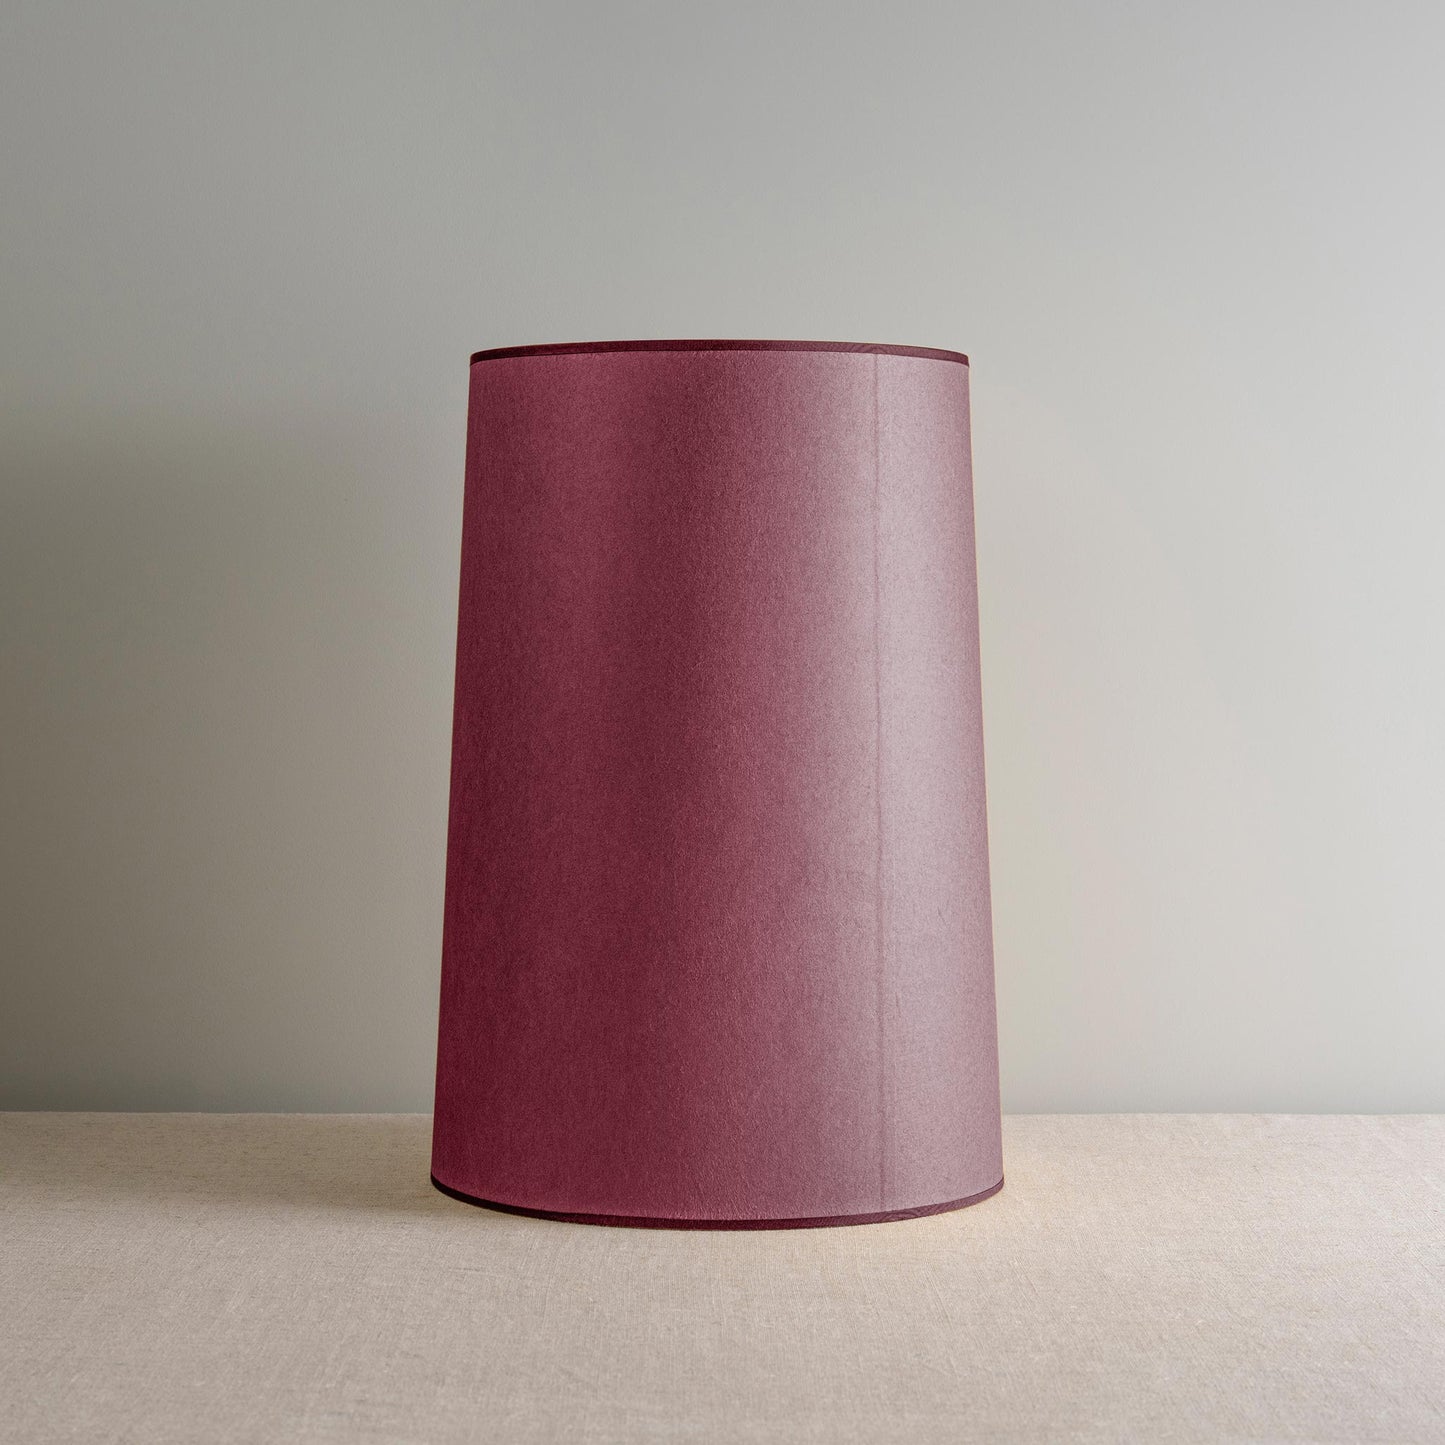 Whimsical Tall Straight Empire Lamp Shade in Burgundy